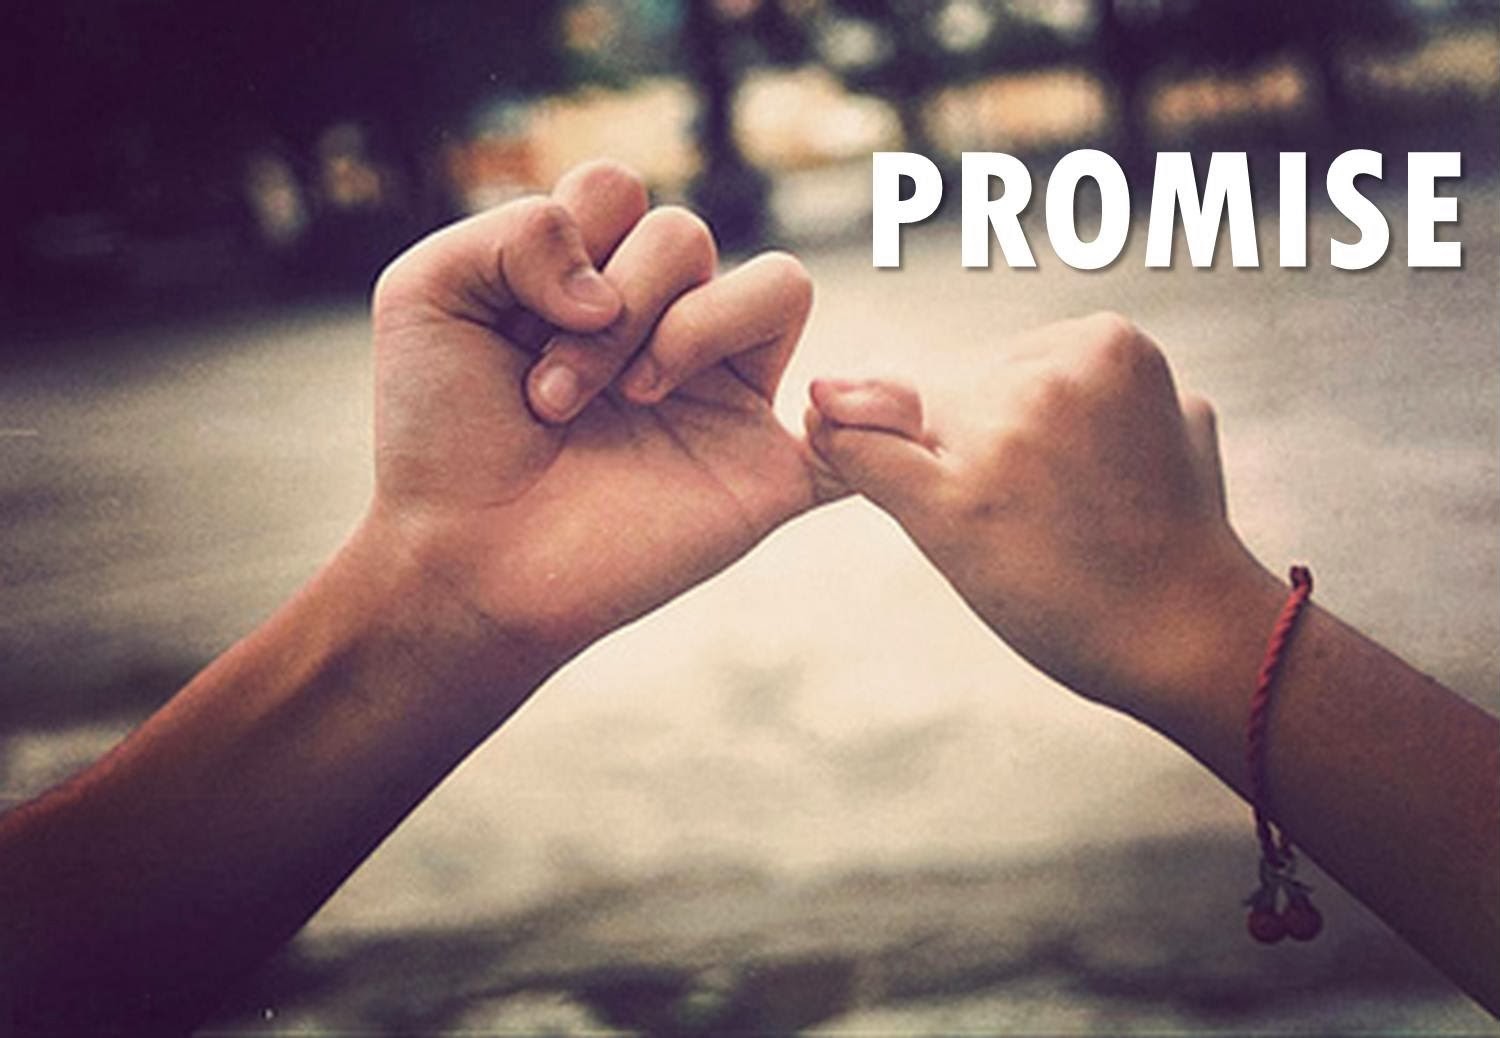 Happy Promise Day 2014. HD Wallpapers and Pics. promise day pic! (1).jpg